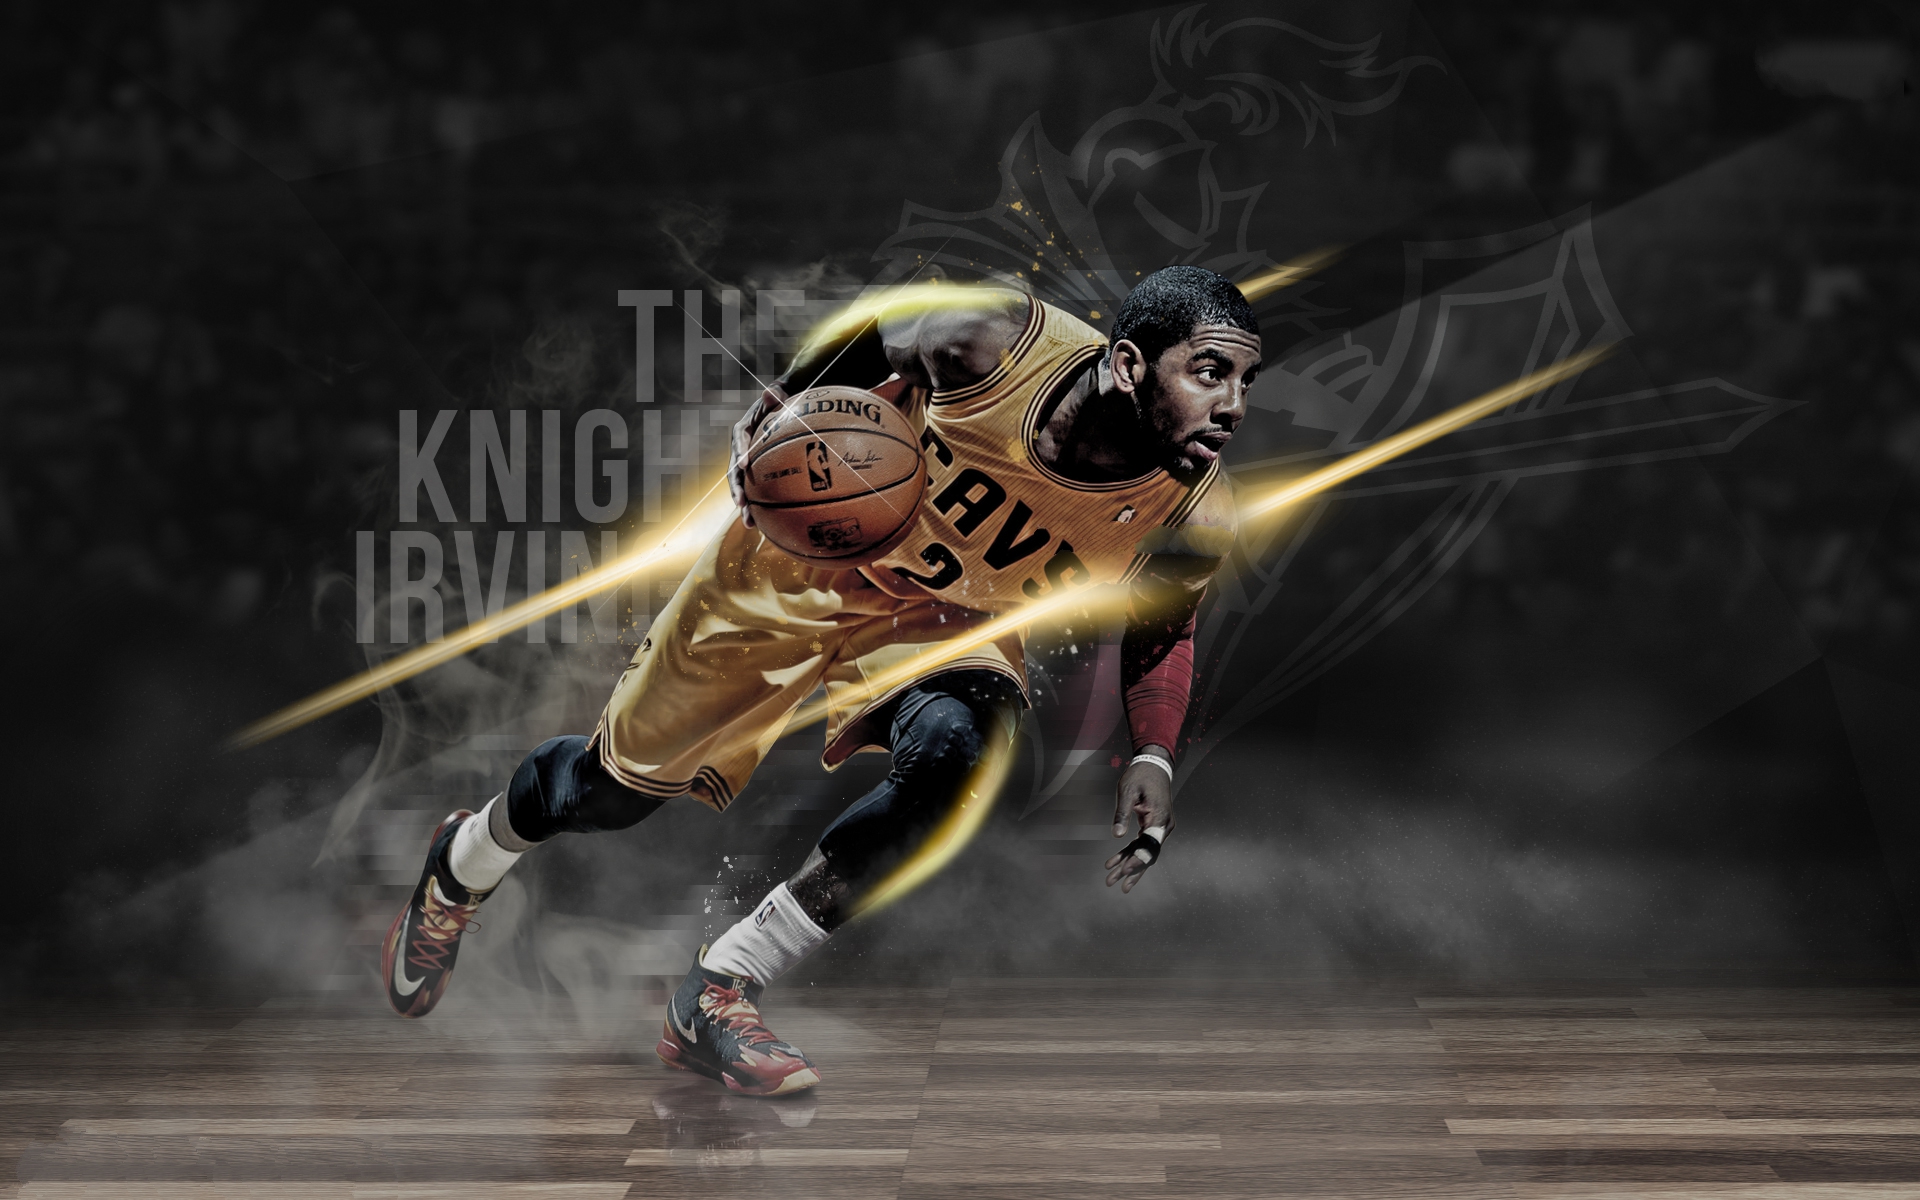 kyrie irving hd wallpapers